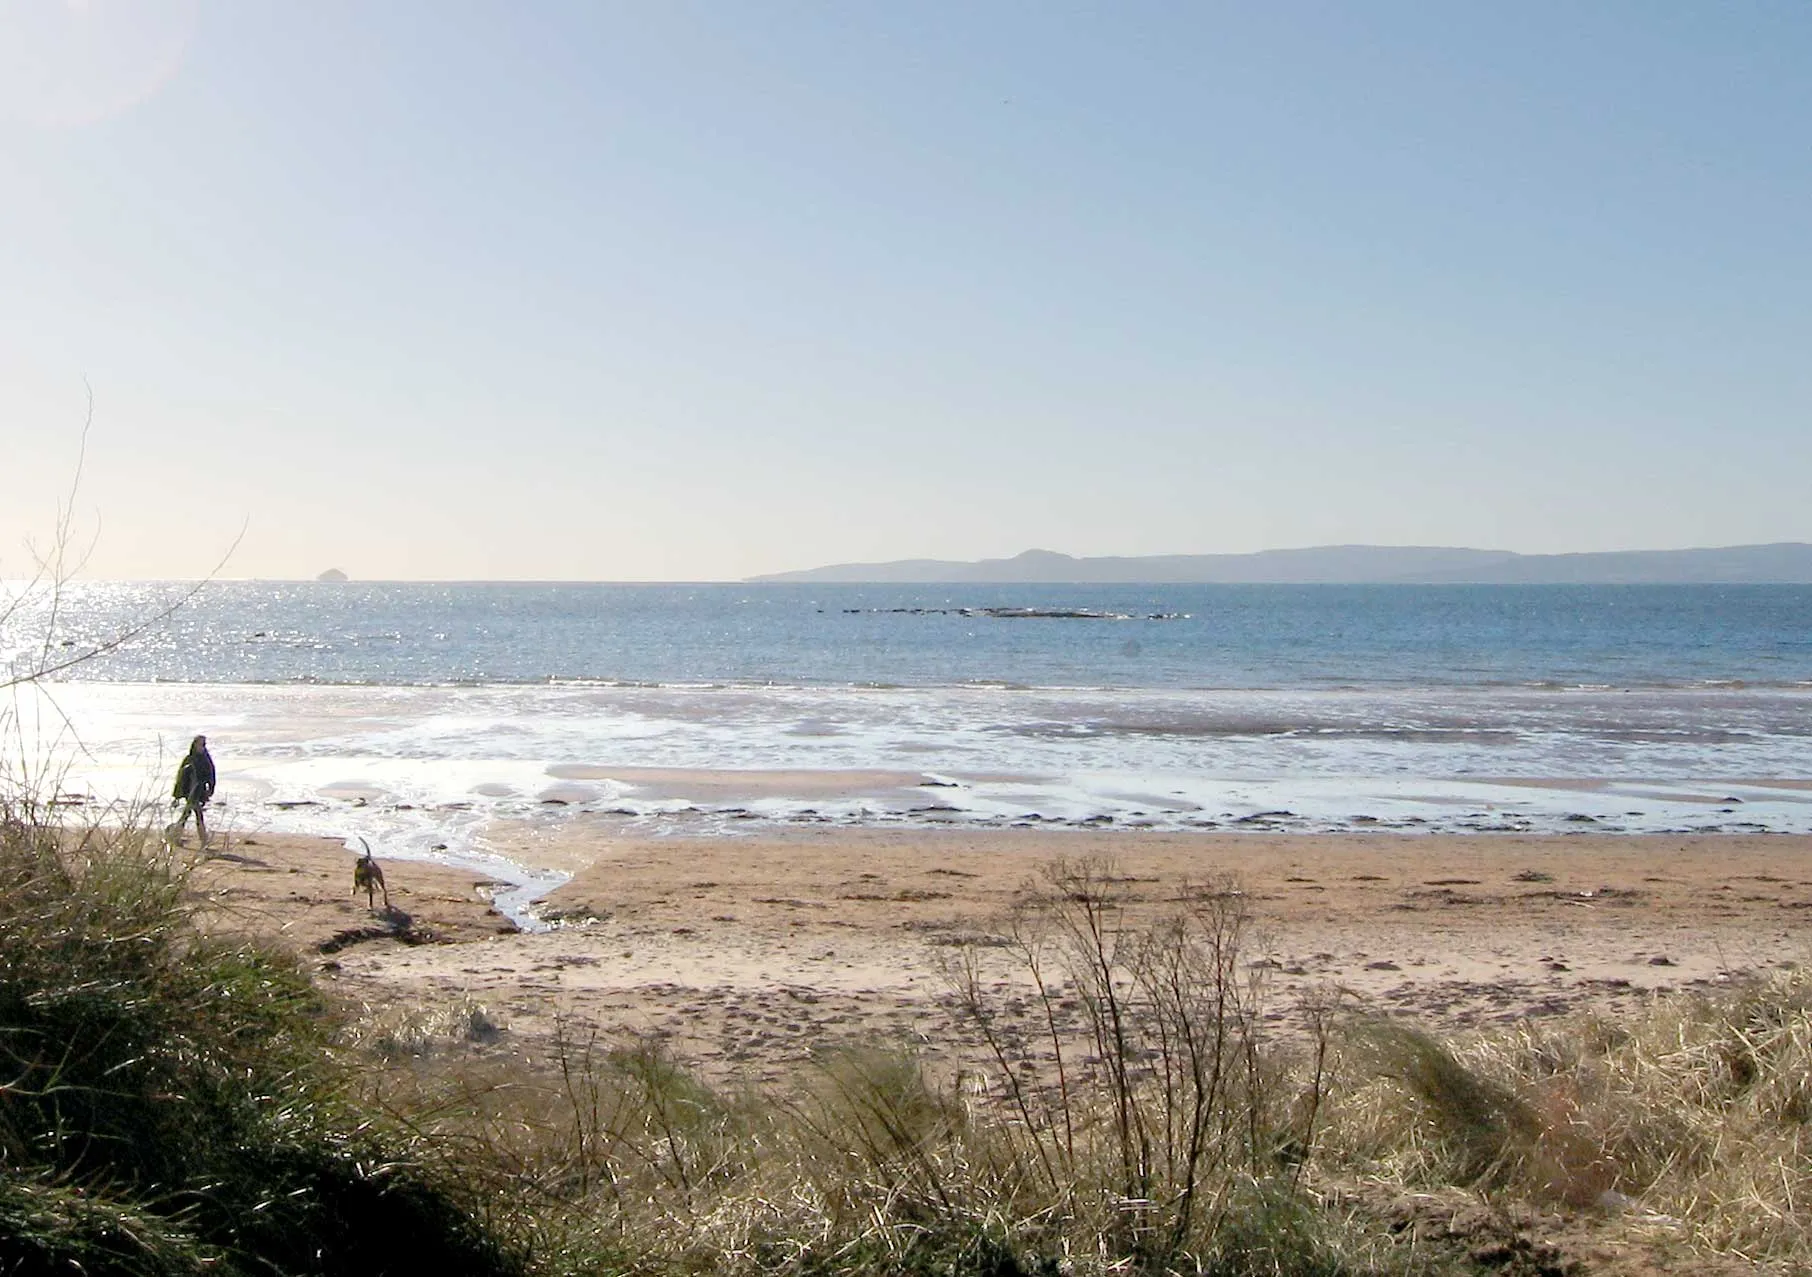 Photo showing: View from the sand beach at Seamill, looking south over the lower Firth of Clyde. The Isle of Arran is visible in the distance to the right, and the small islet of Aisla Craig can just be seen on the horizon. Seamill, Ayrshire, lies close to West Kilbride. 
photograph taken in February 2006 by User:Dave souza.

Any re-use to contain this licence notice and to attribute the work to User:Dave souza at Wikipedia.